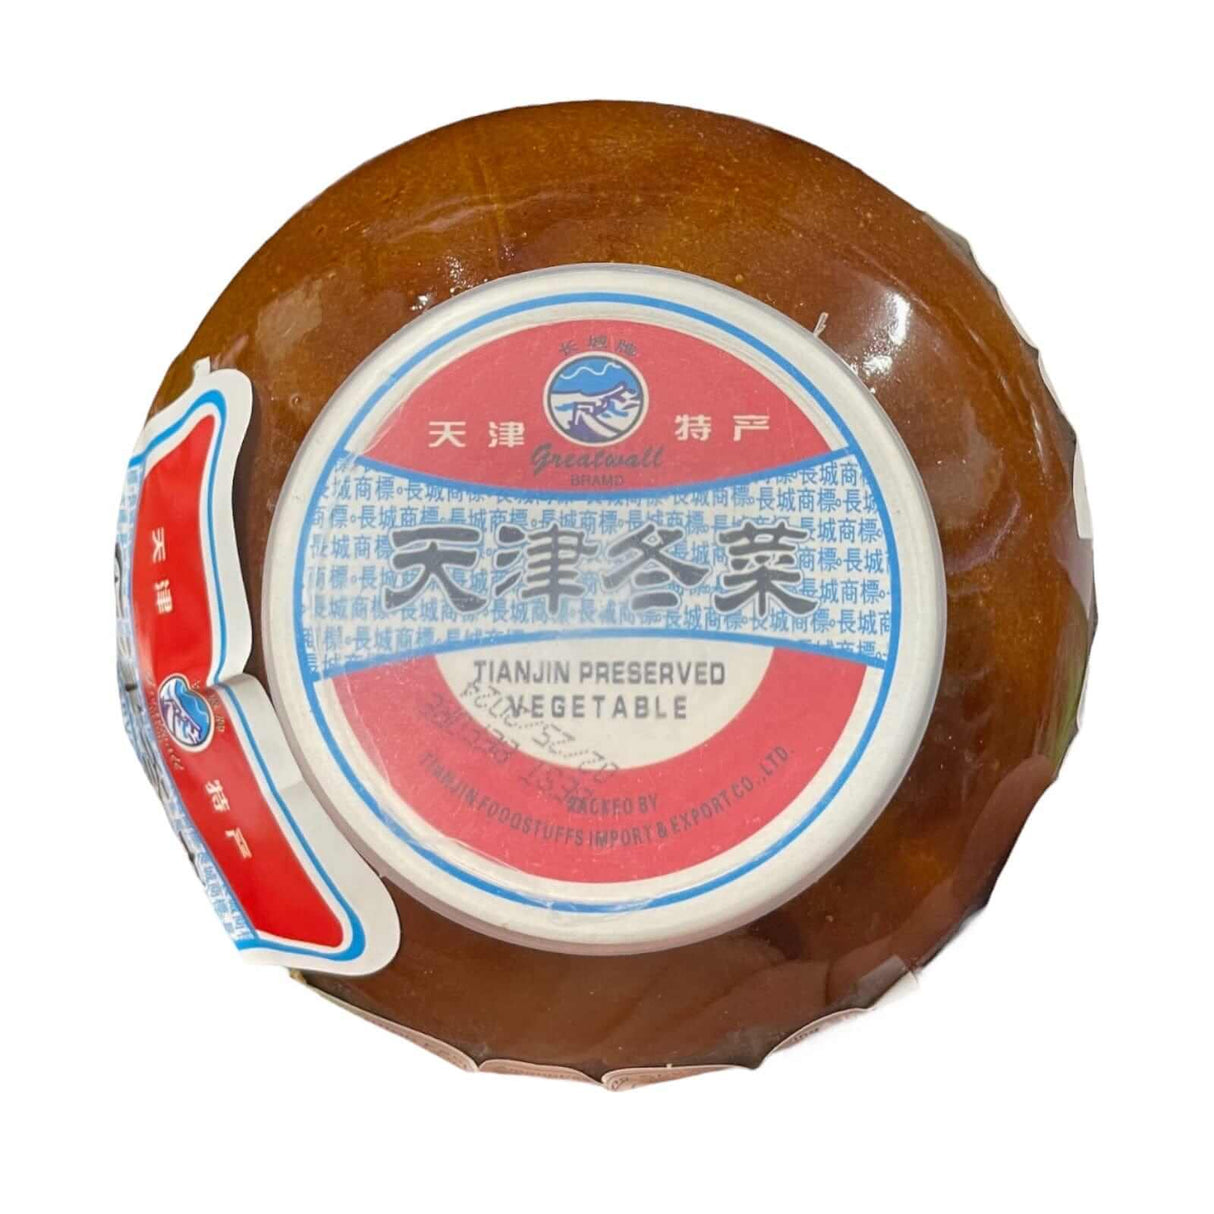 Greatwall Brand Tianjin Preserved Vegetable